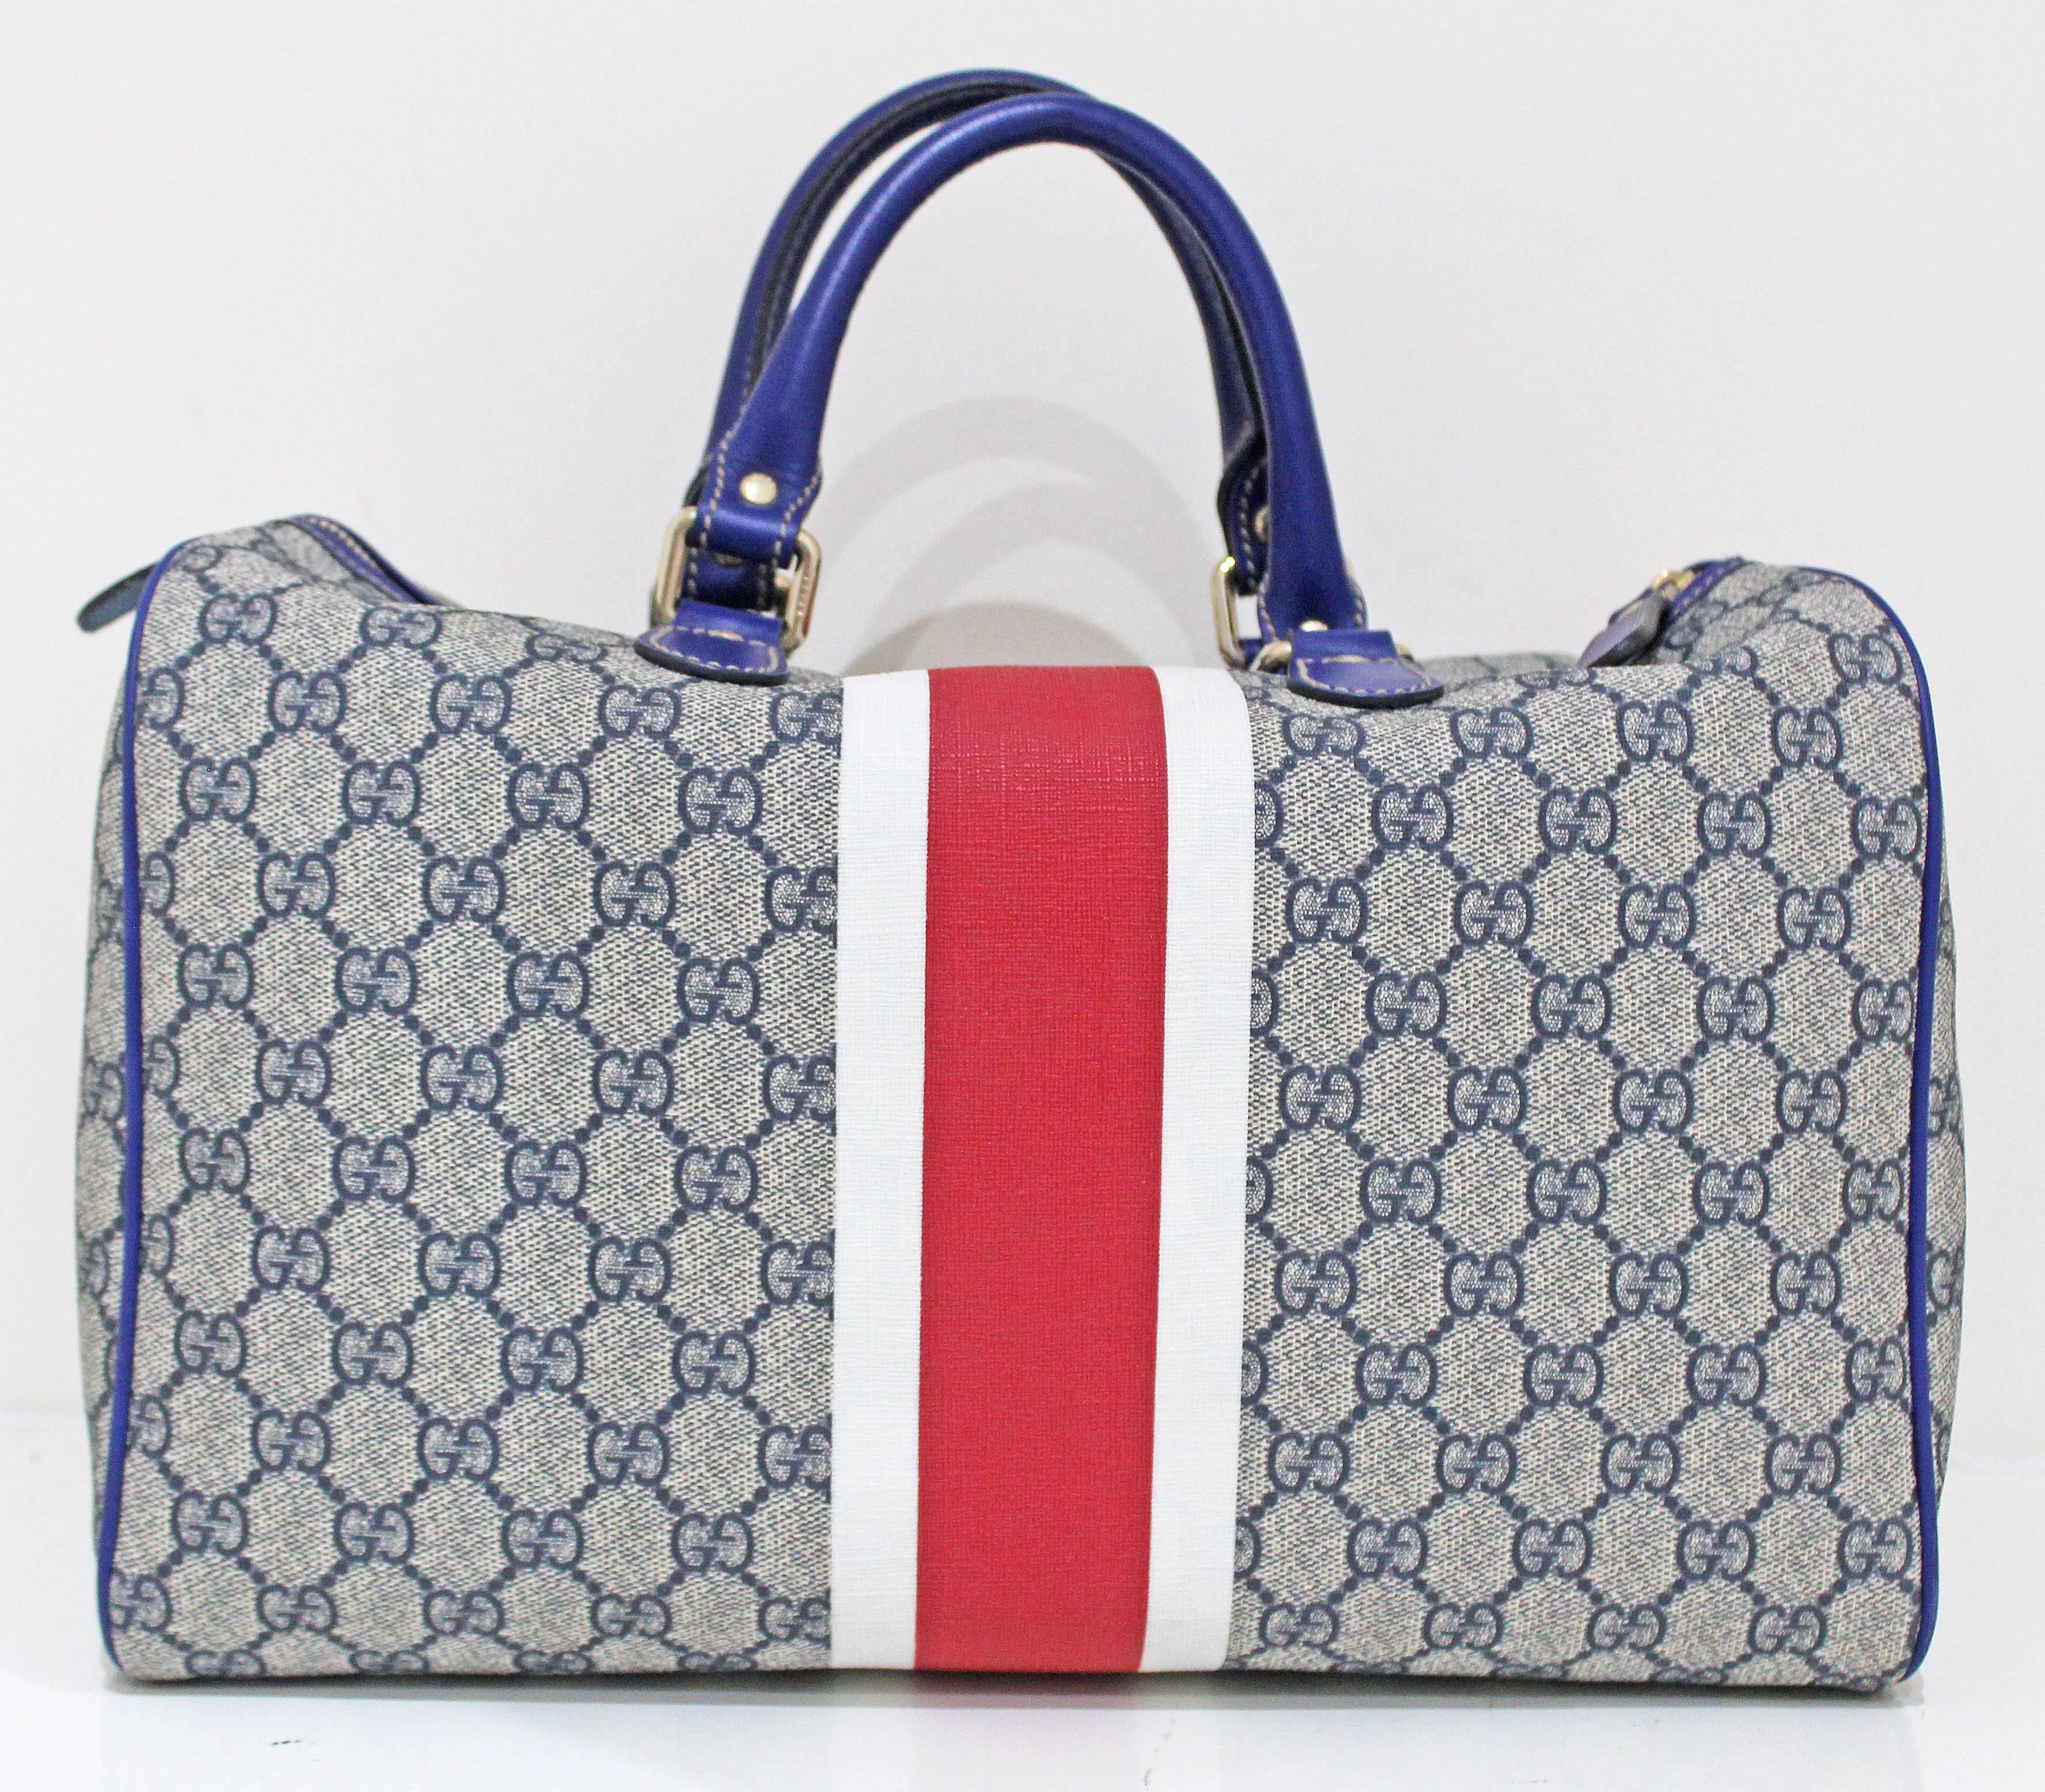 Gray Limited Edition Gucci Union Jack Sloaney bag, c. 2009 